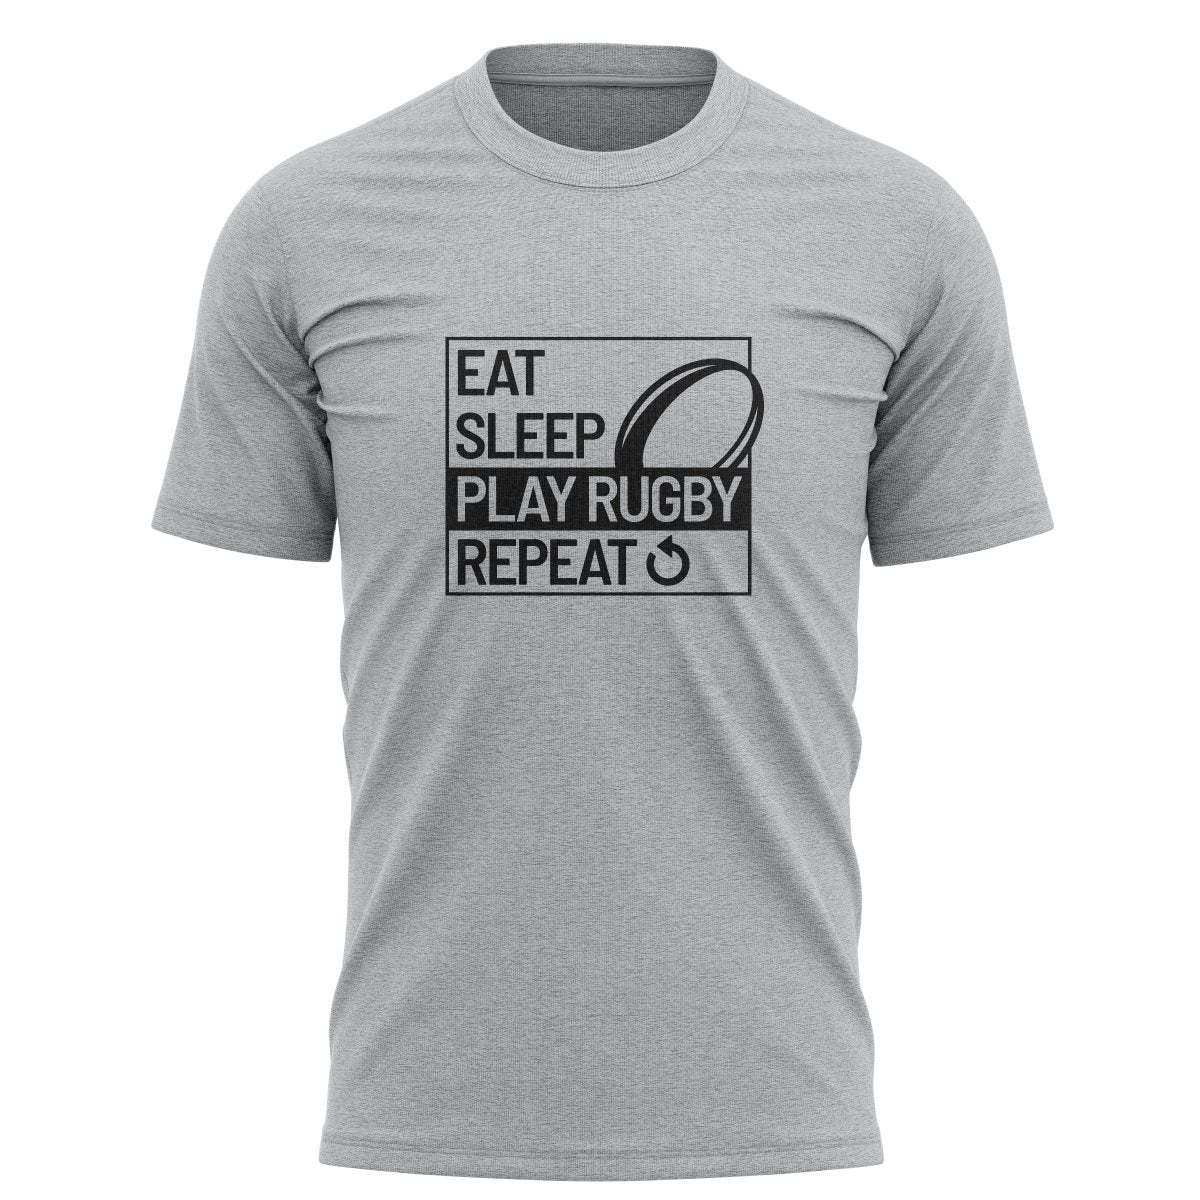 Eat Sleep Rugby Graphic Tee - www.therugbyshop.com www.therugbyshop.com MEN&#39;S / HEATHER GREY / S SANMAR TEES Eat Sleep Rugby Graphic Tee